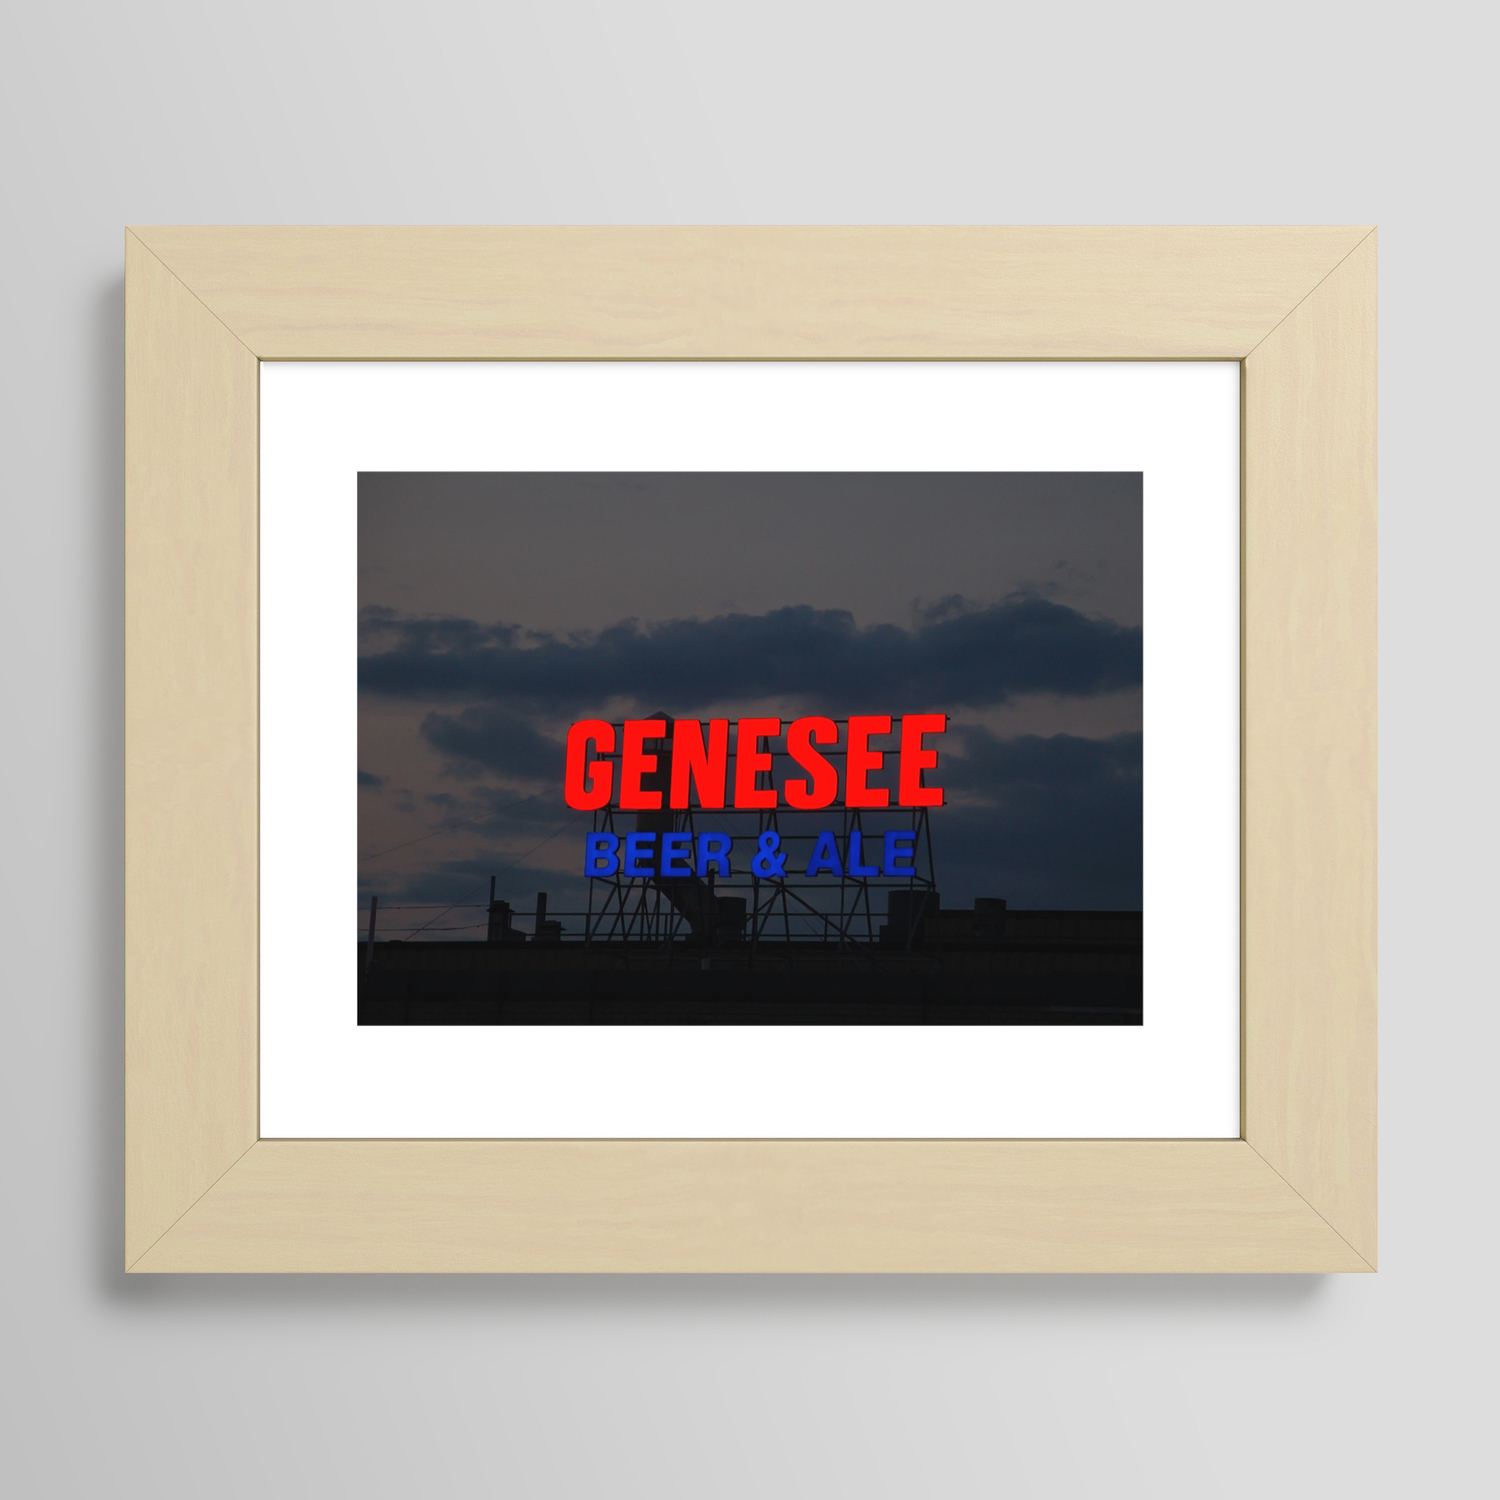 GENESEE BEER & ALE FRAMED COLOR AD PRINTS YOUR CHOICE